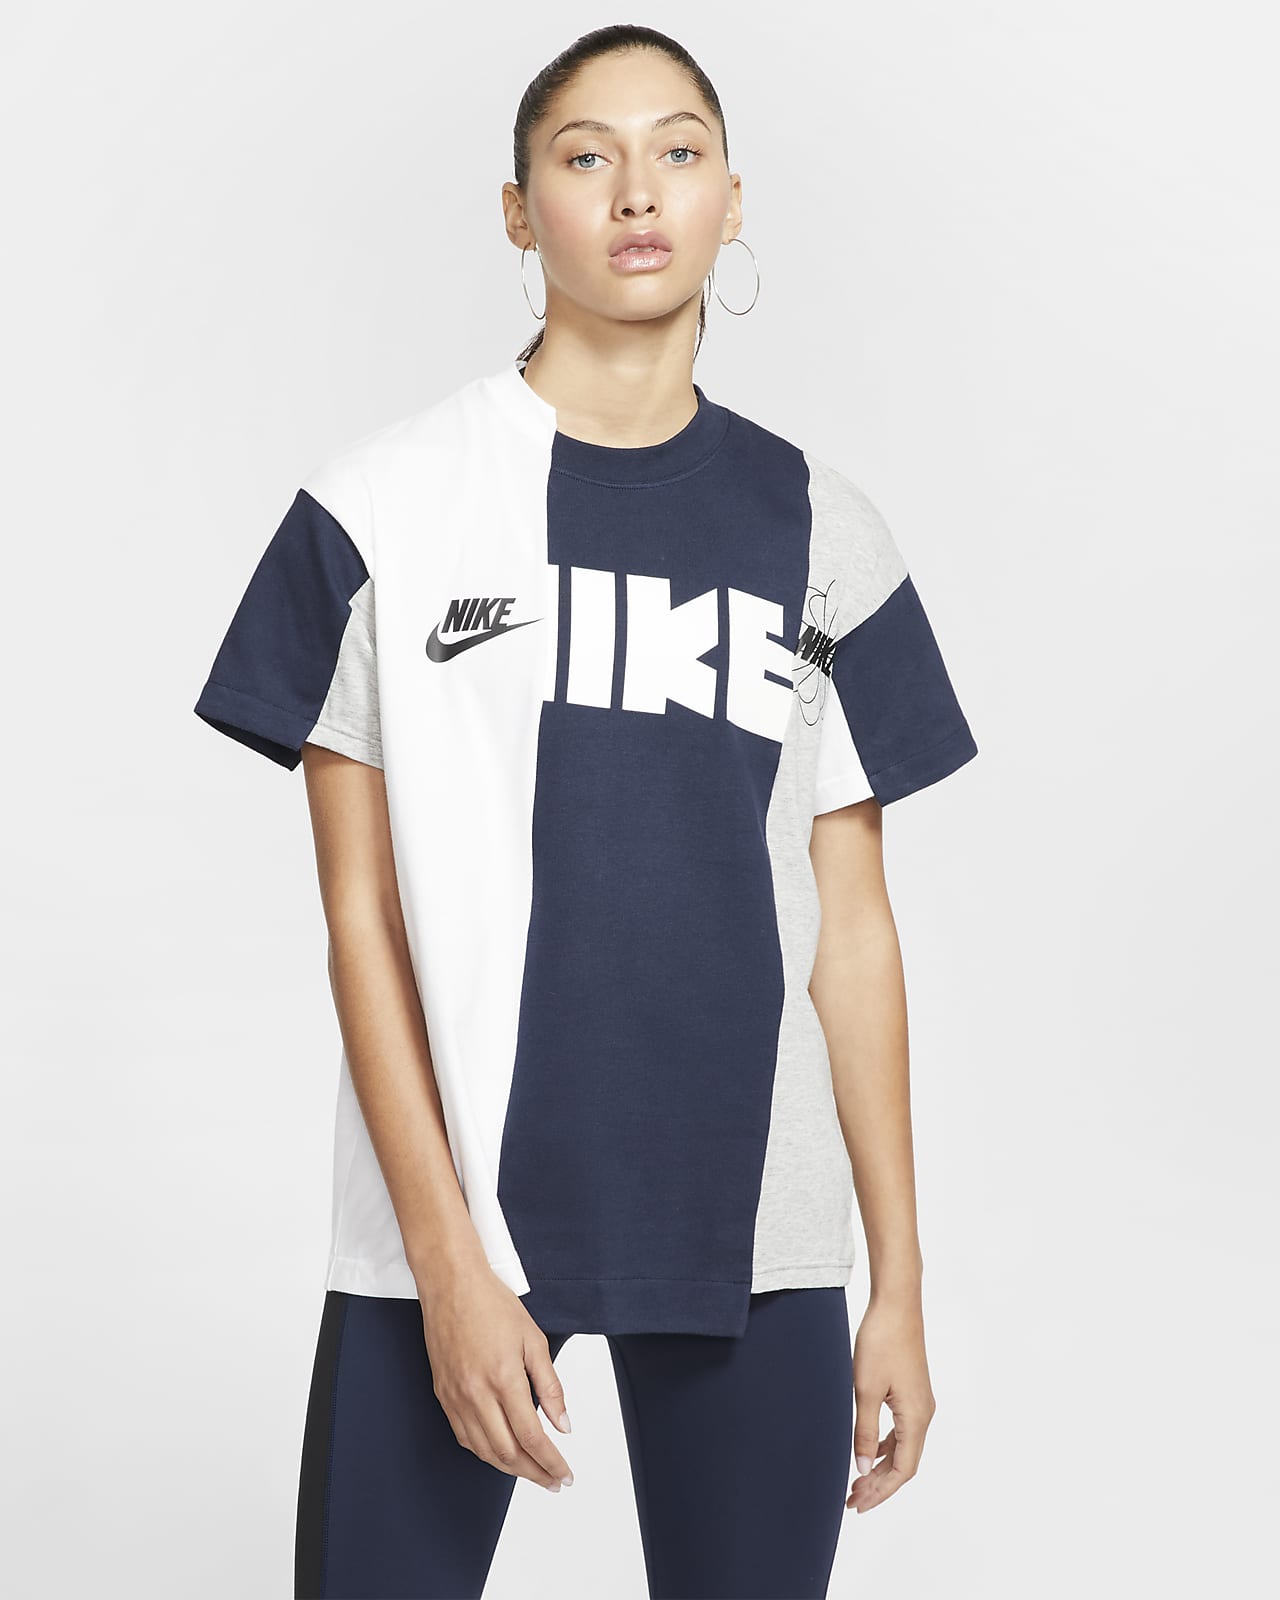 nike t shirt blue and white